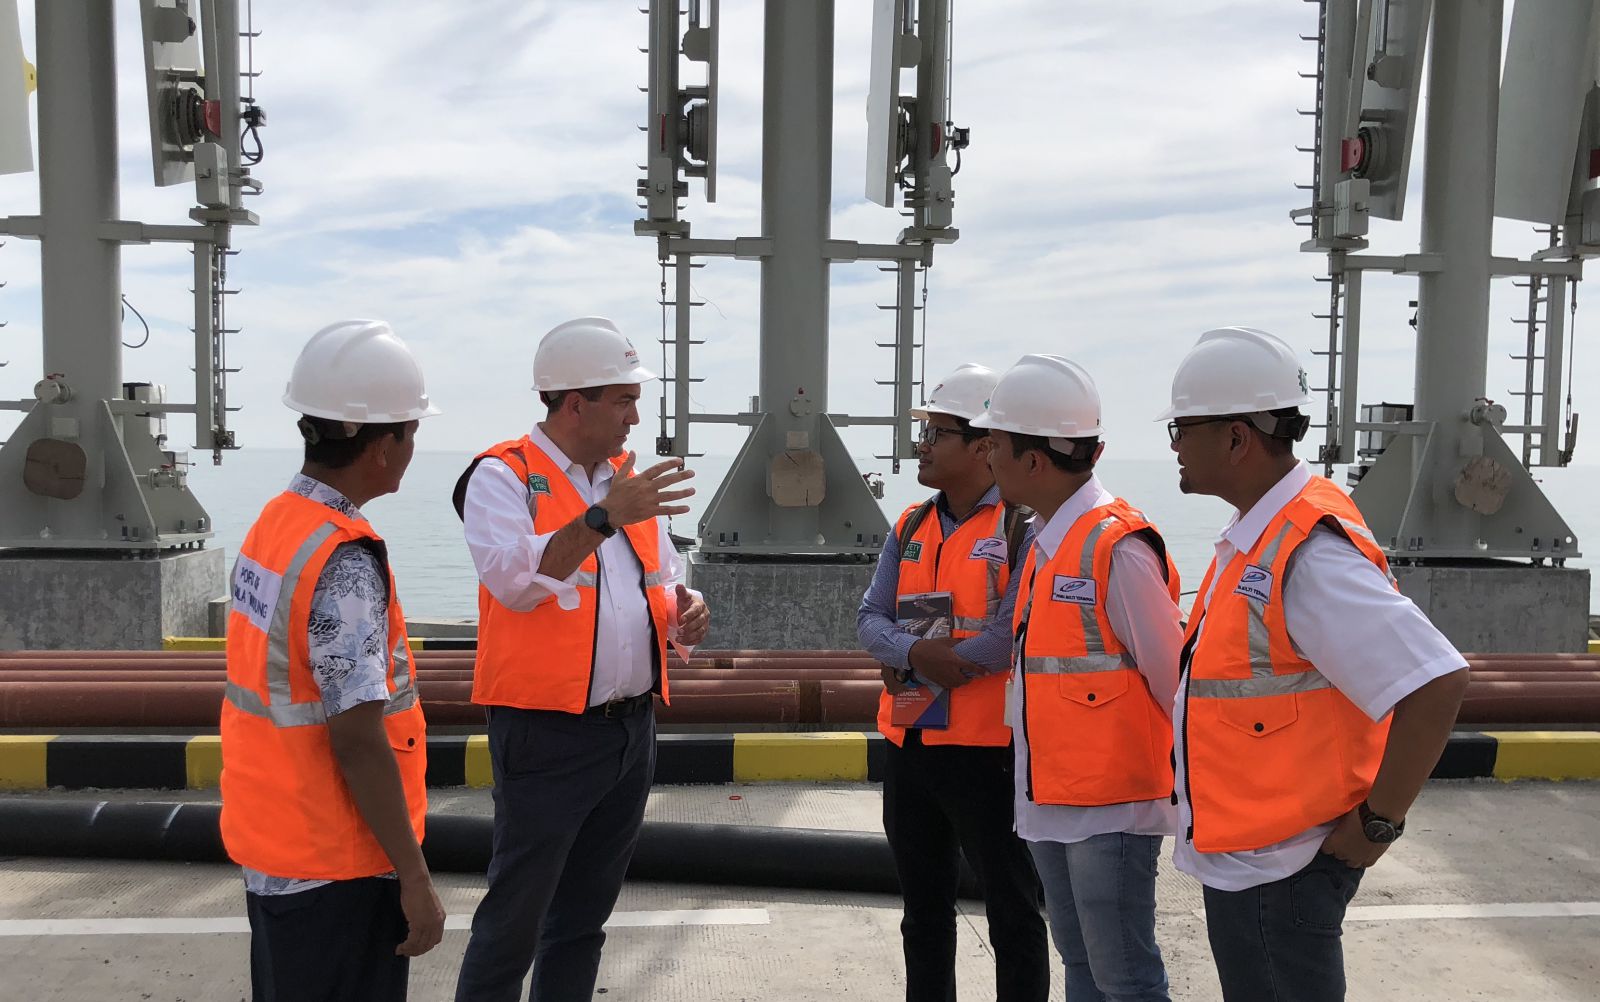 photo, David Bohigian and four other men talk while at a port, OPIC, Overseas Private Investment Corporation, Indonesia, Kuala Tanjung Port, Malacca, development, manufacturing, investment, emerging markets, public diplomacy, national security, investing overseas